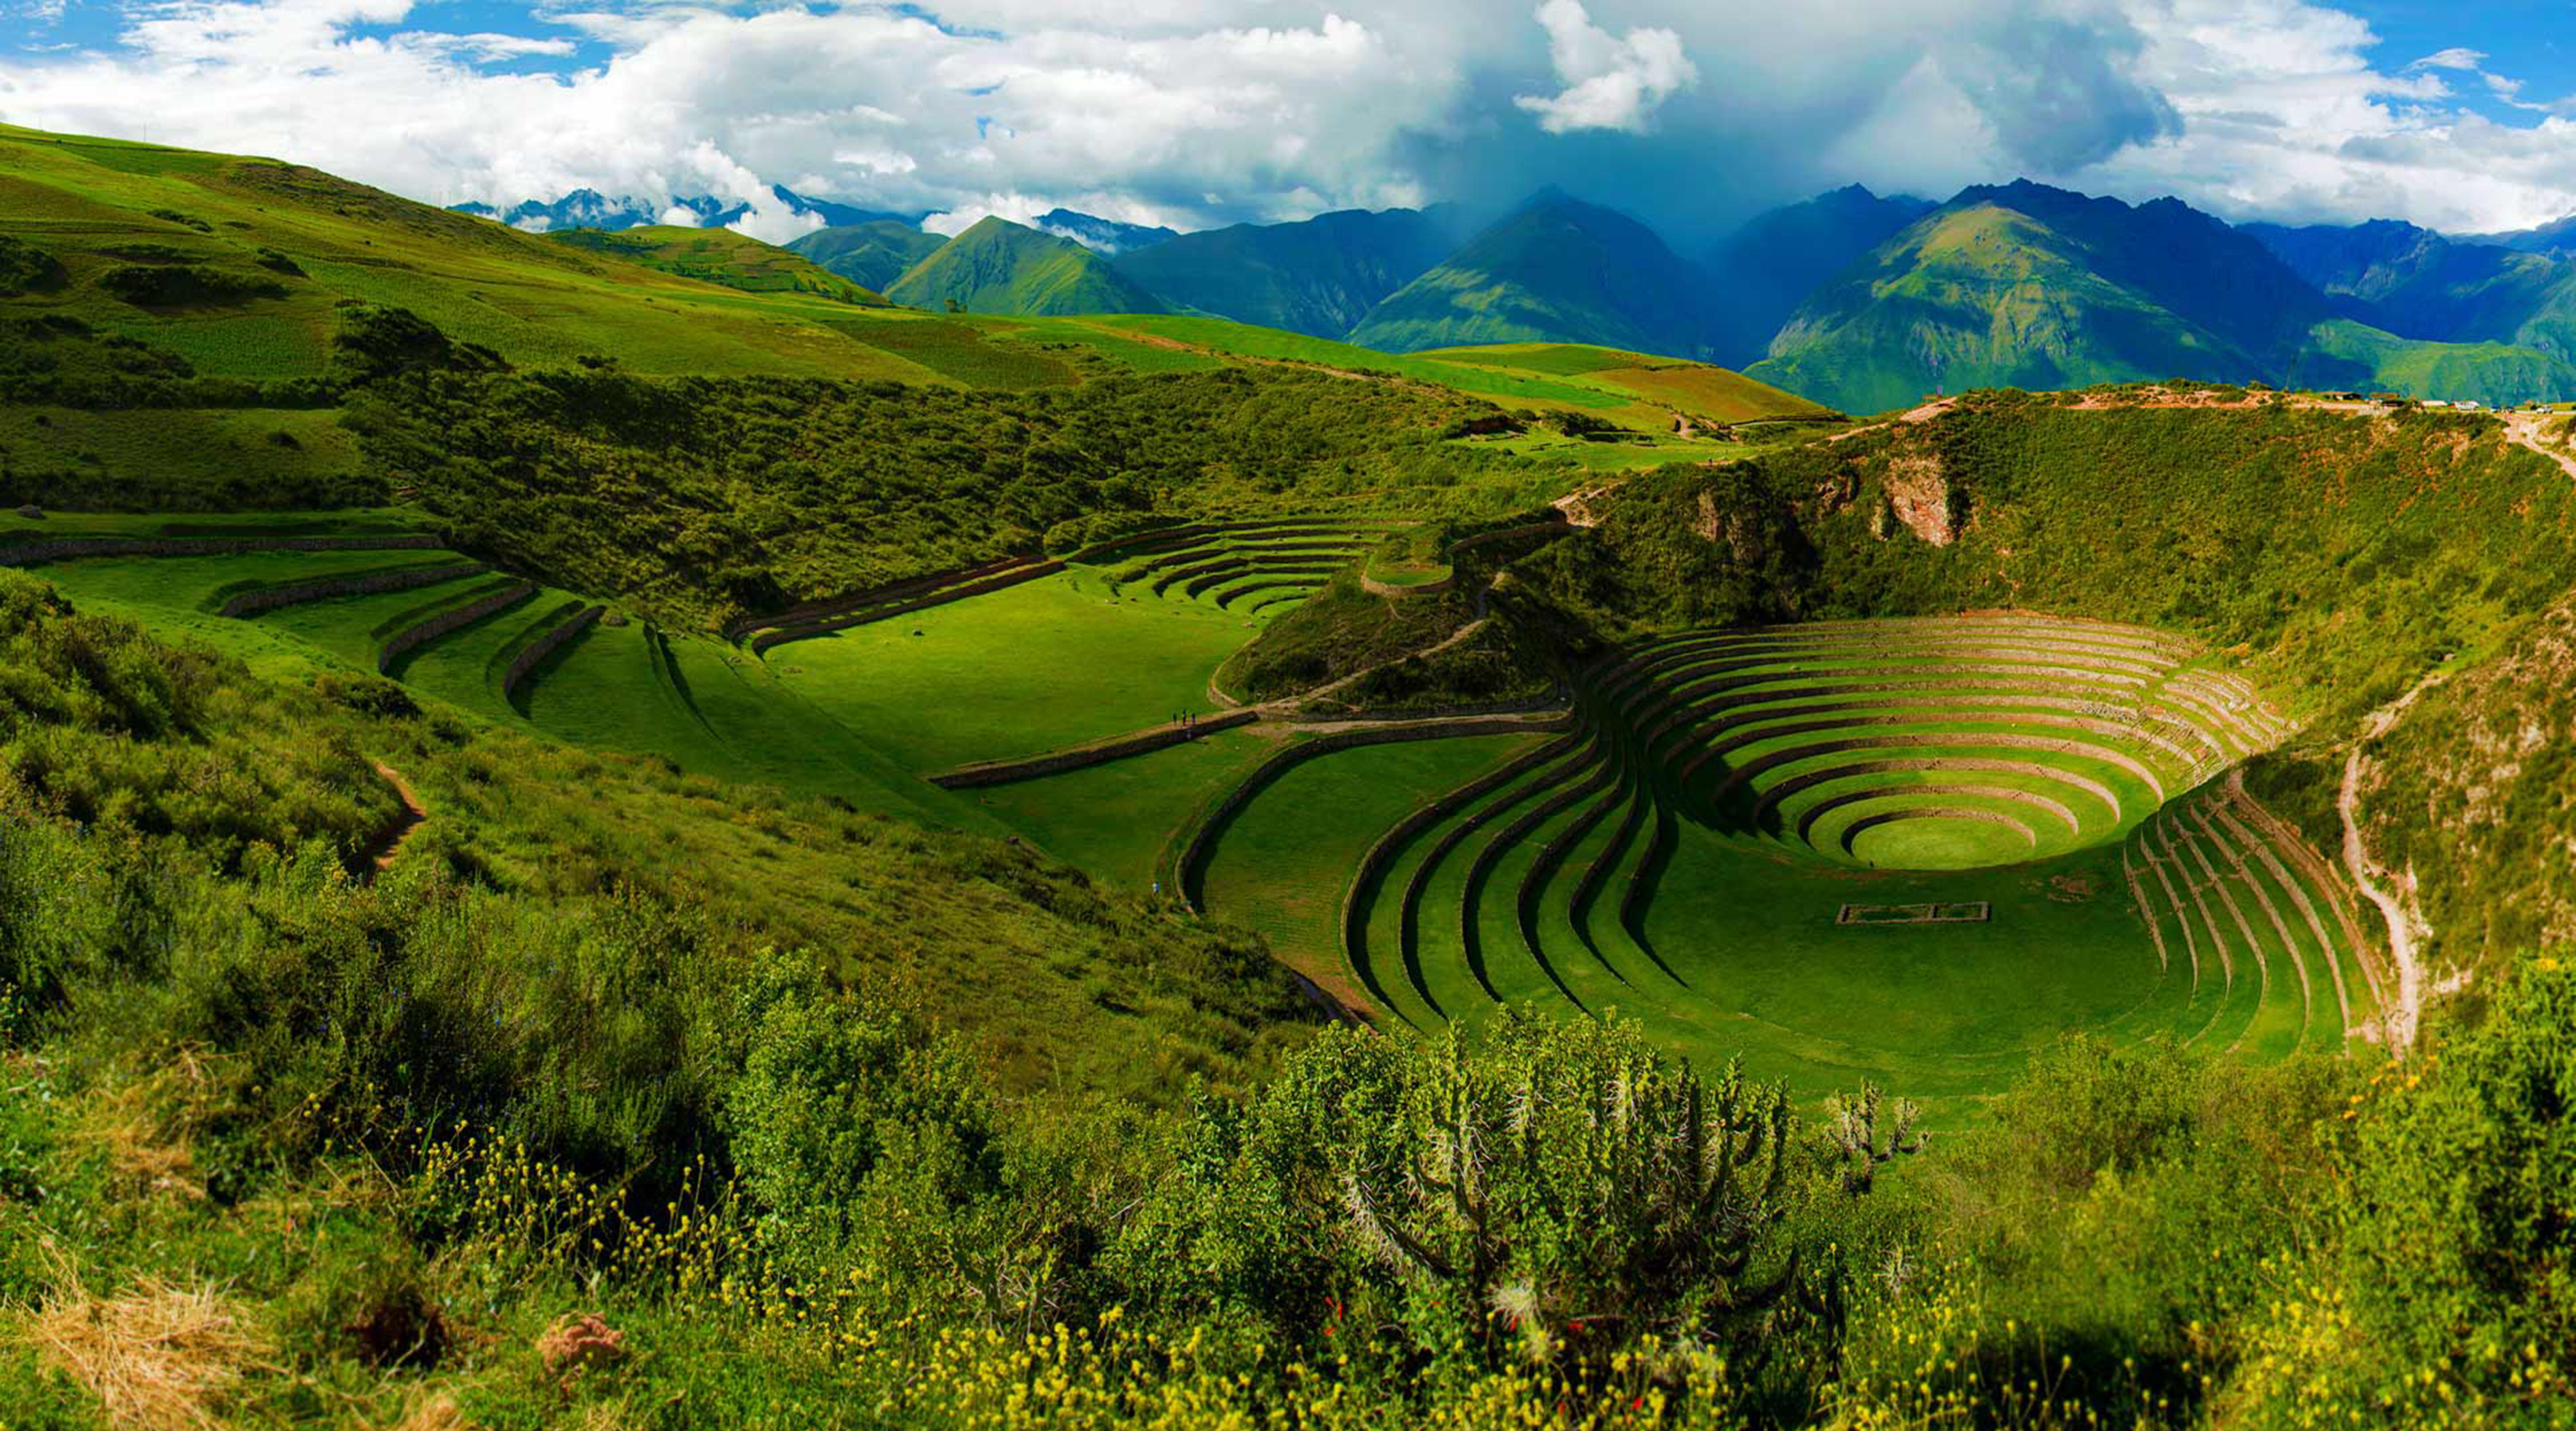 Escape into the Andes on the Inca Trail en route to Machu Pichu.